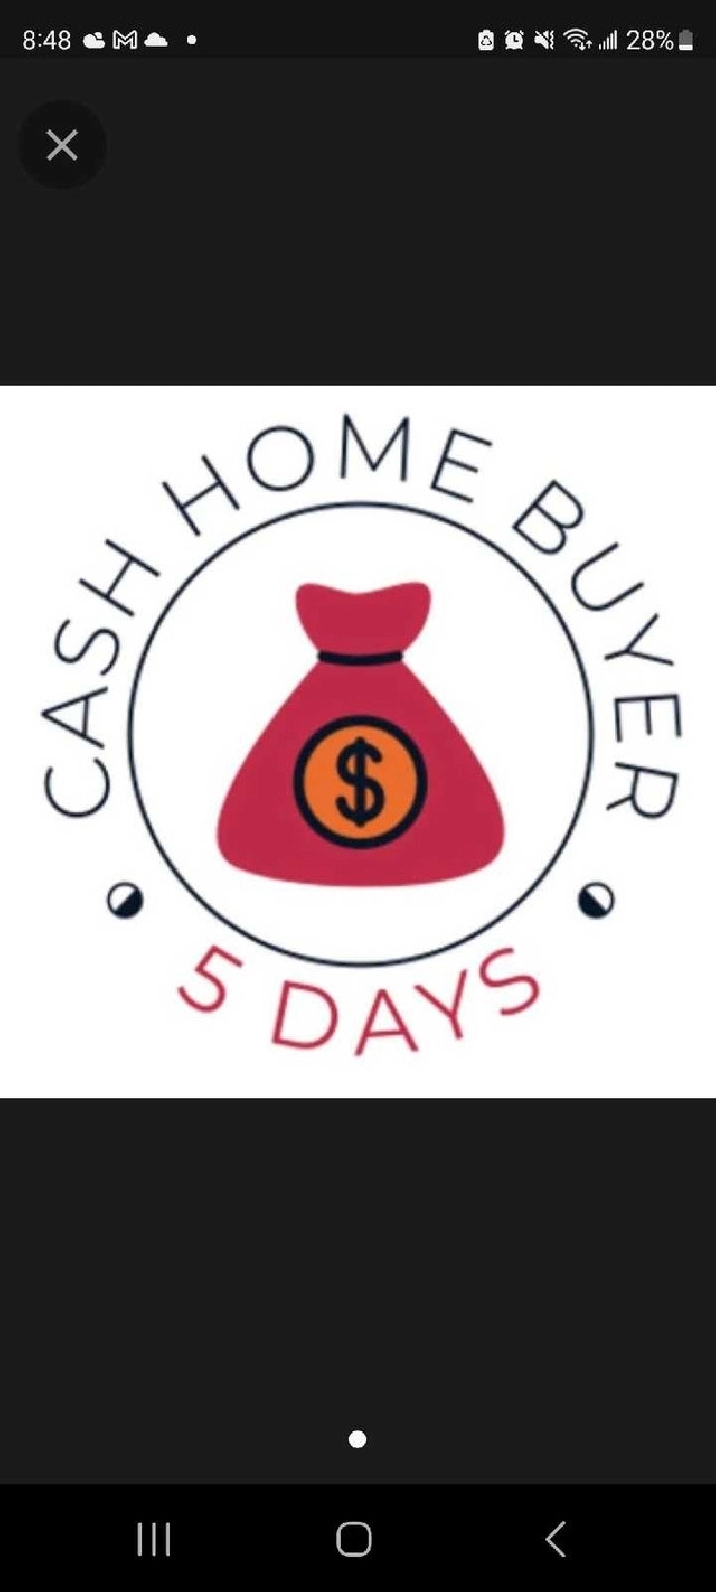 ATTENTION Sell Your Home In Days Not Months! ⭐️⭐️⭐️⭐️⭐️ in Calgary,AB - Houses for Sale